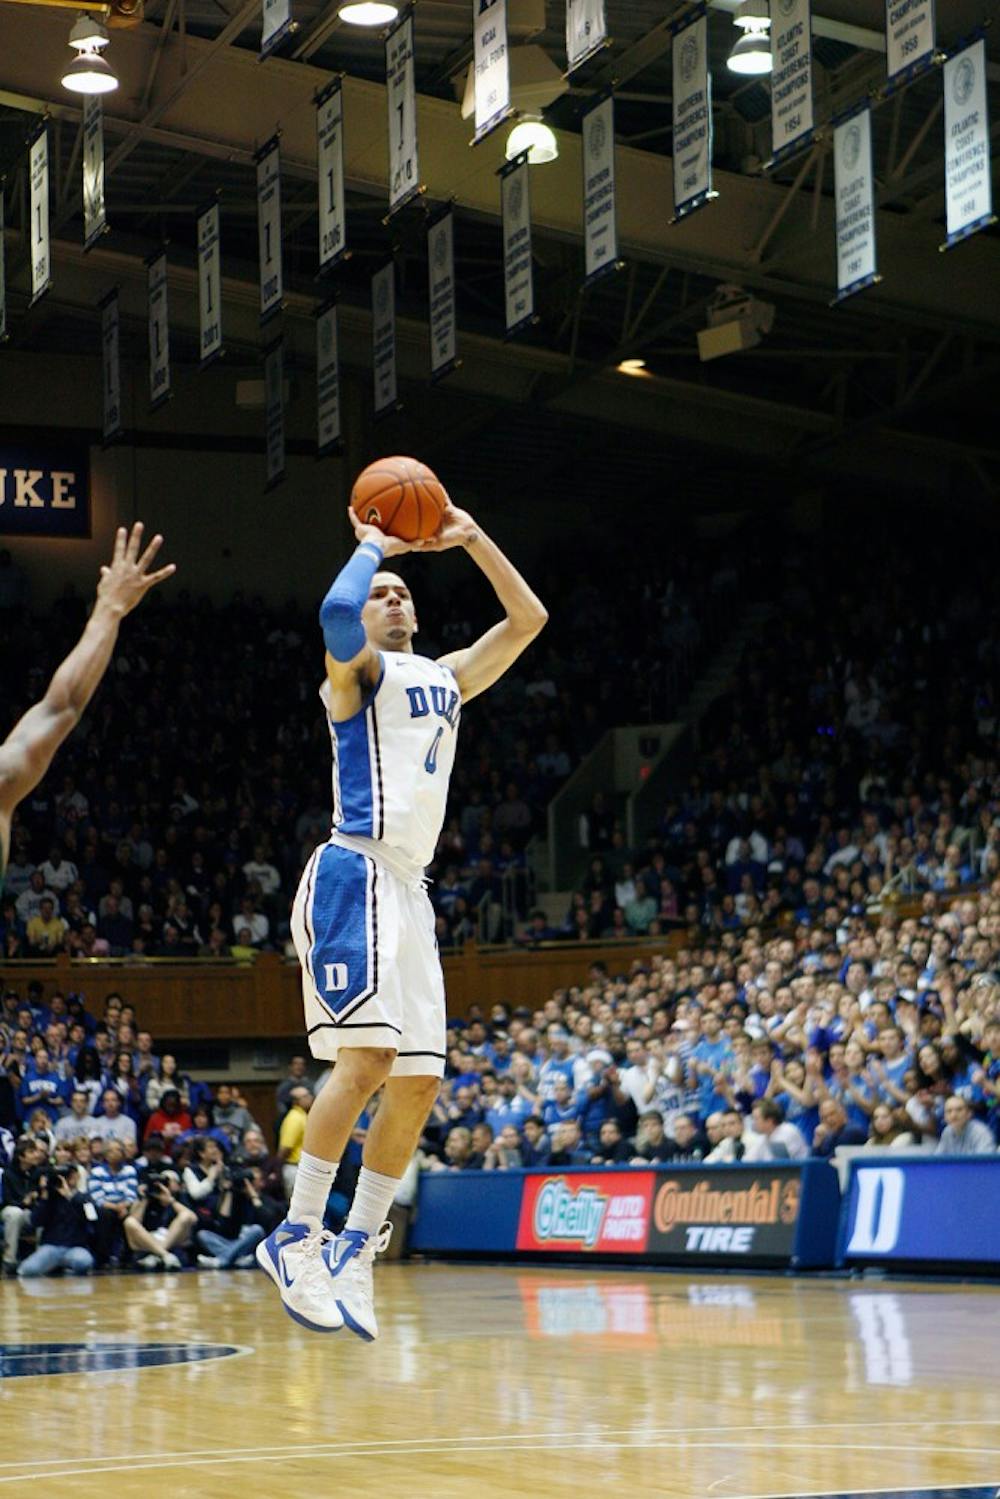 Austin Rivers scored 20 points Sunday, but missed free throws down the stretch spelled doom for Duke